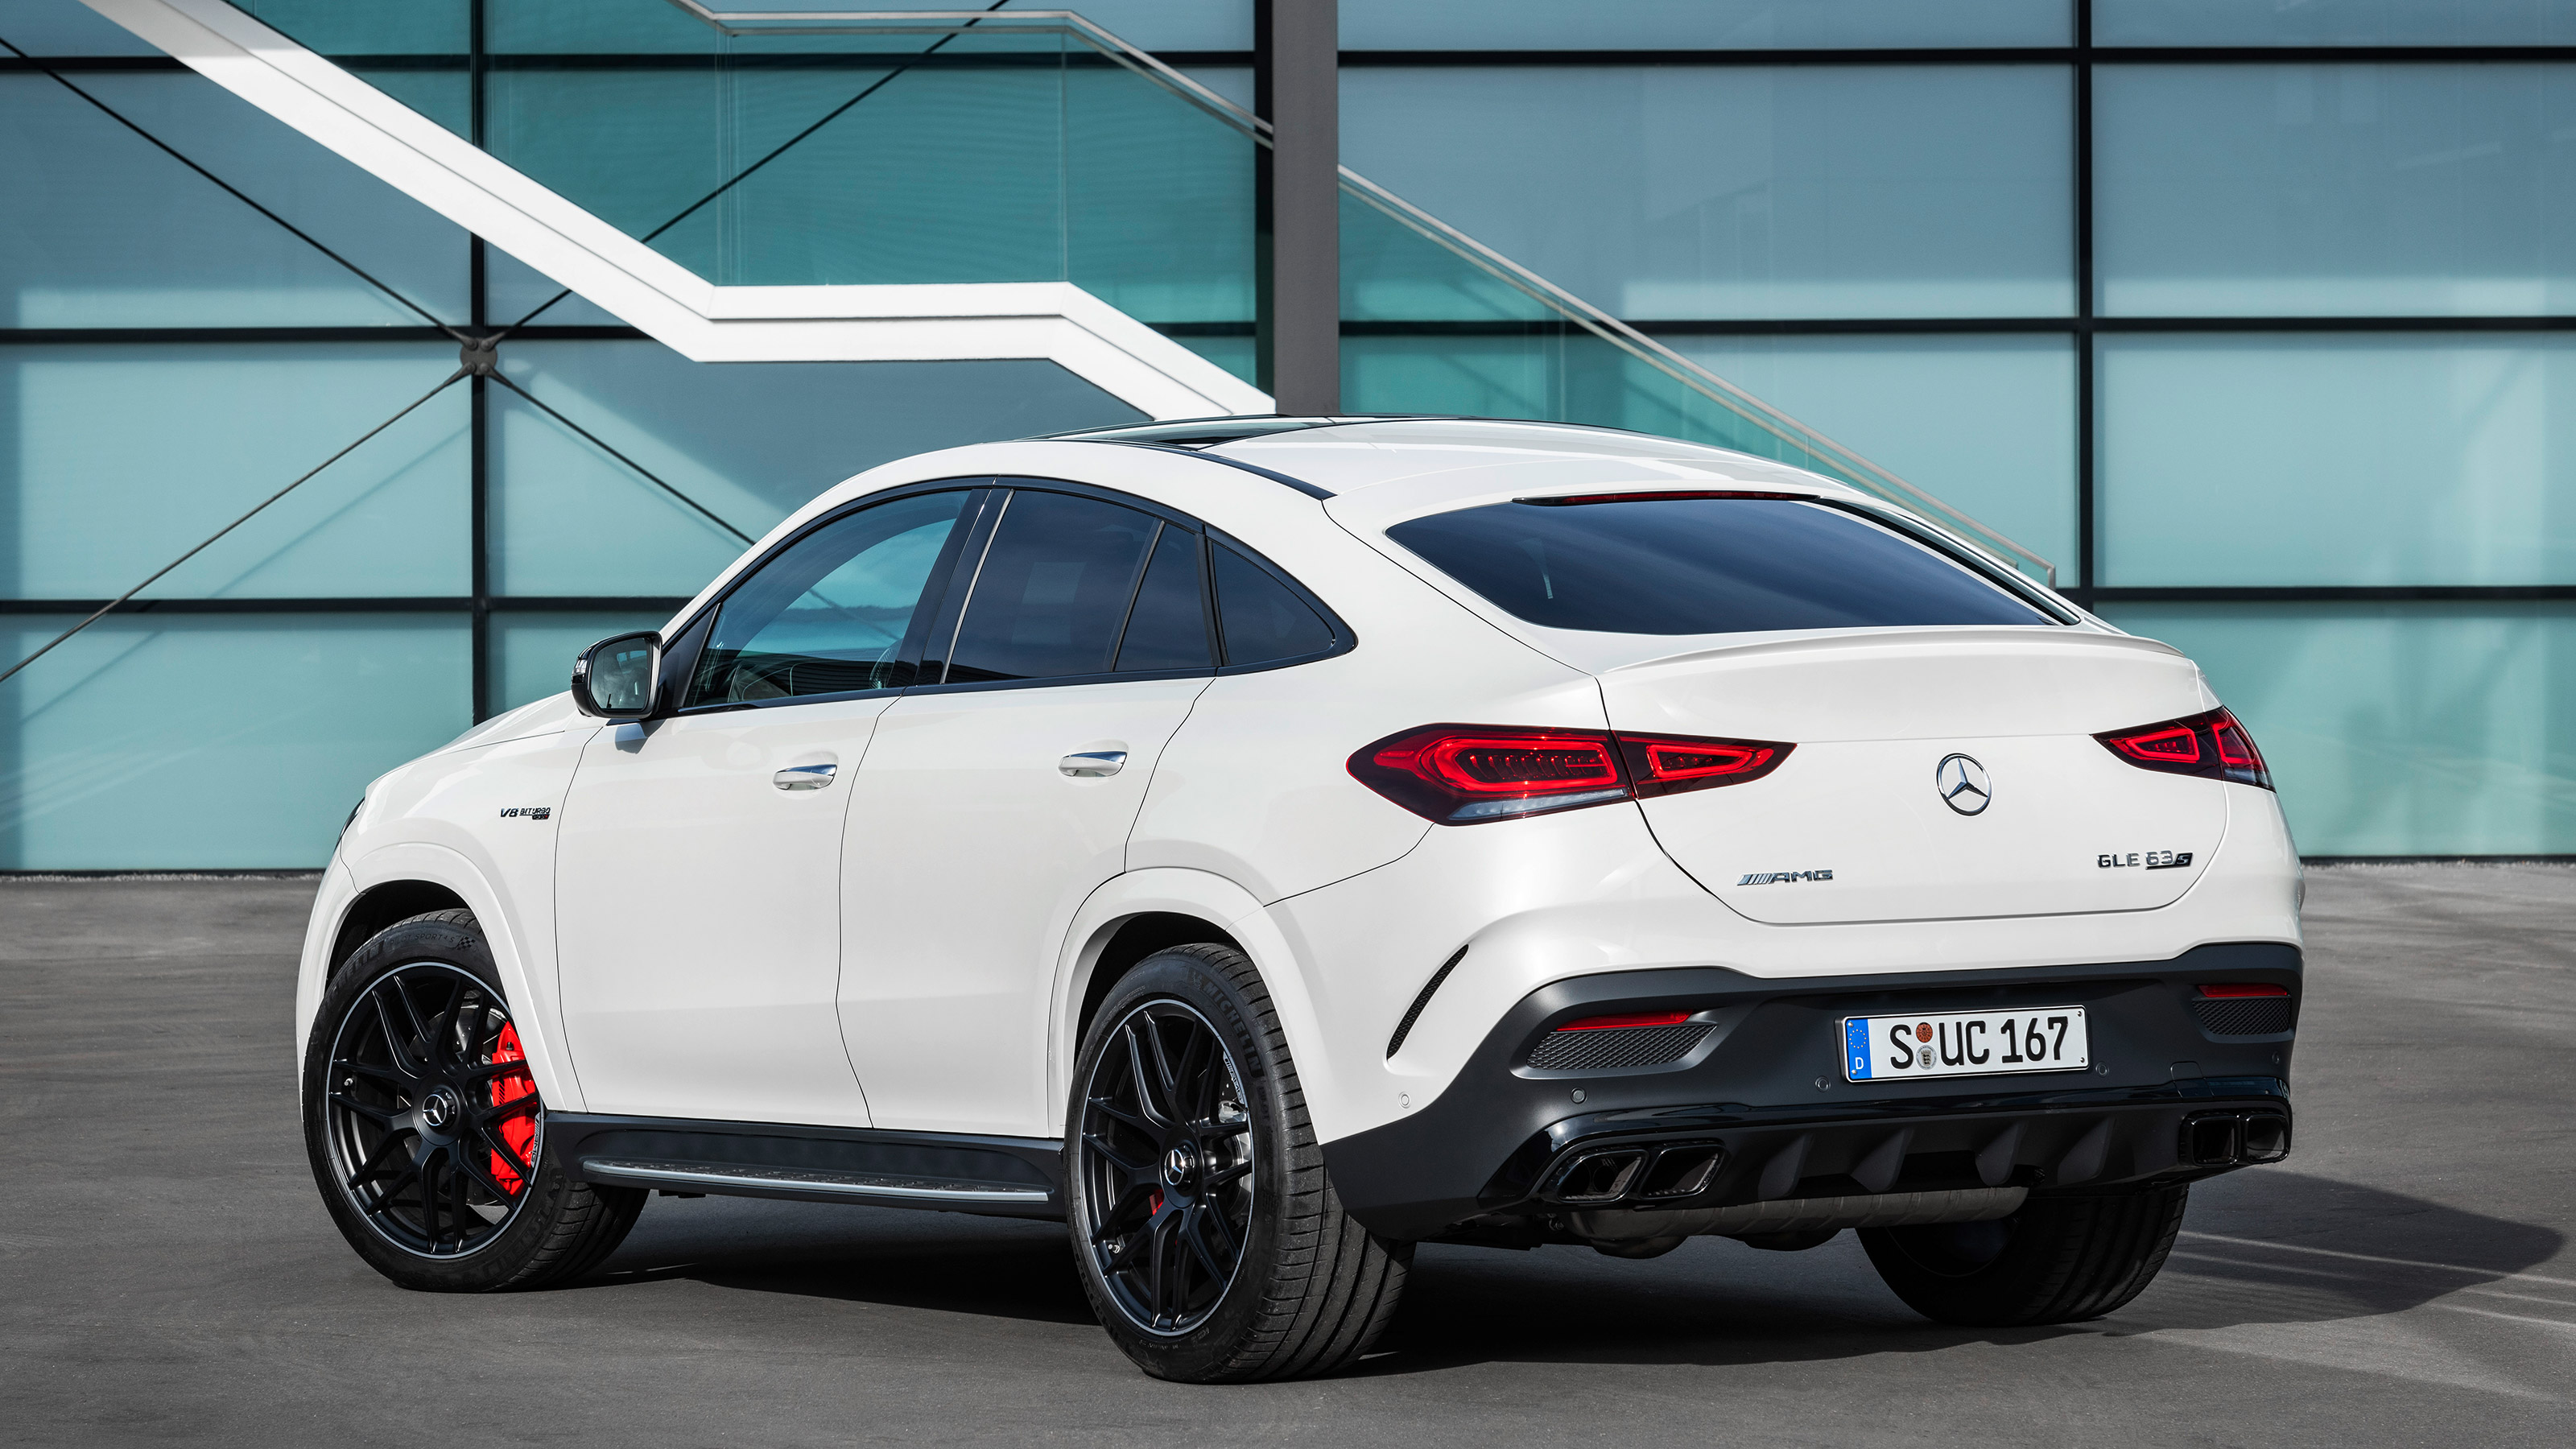 Mercedes Amg Gle63 S Coupe Revealed Amg Completes Its Large Suv Offensive Evo